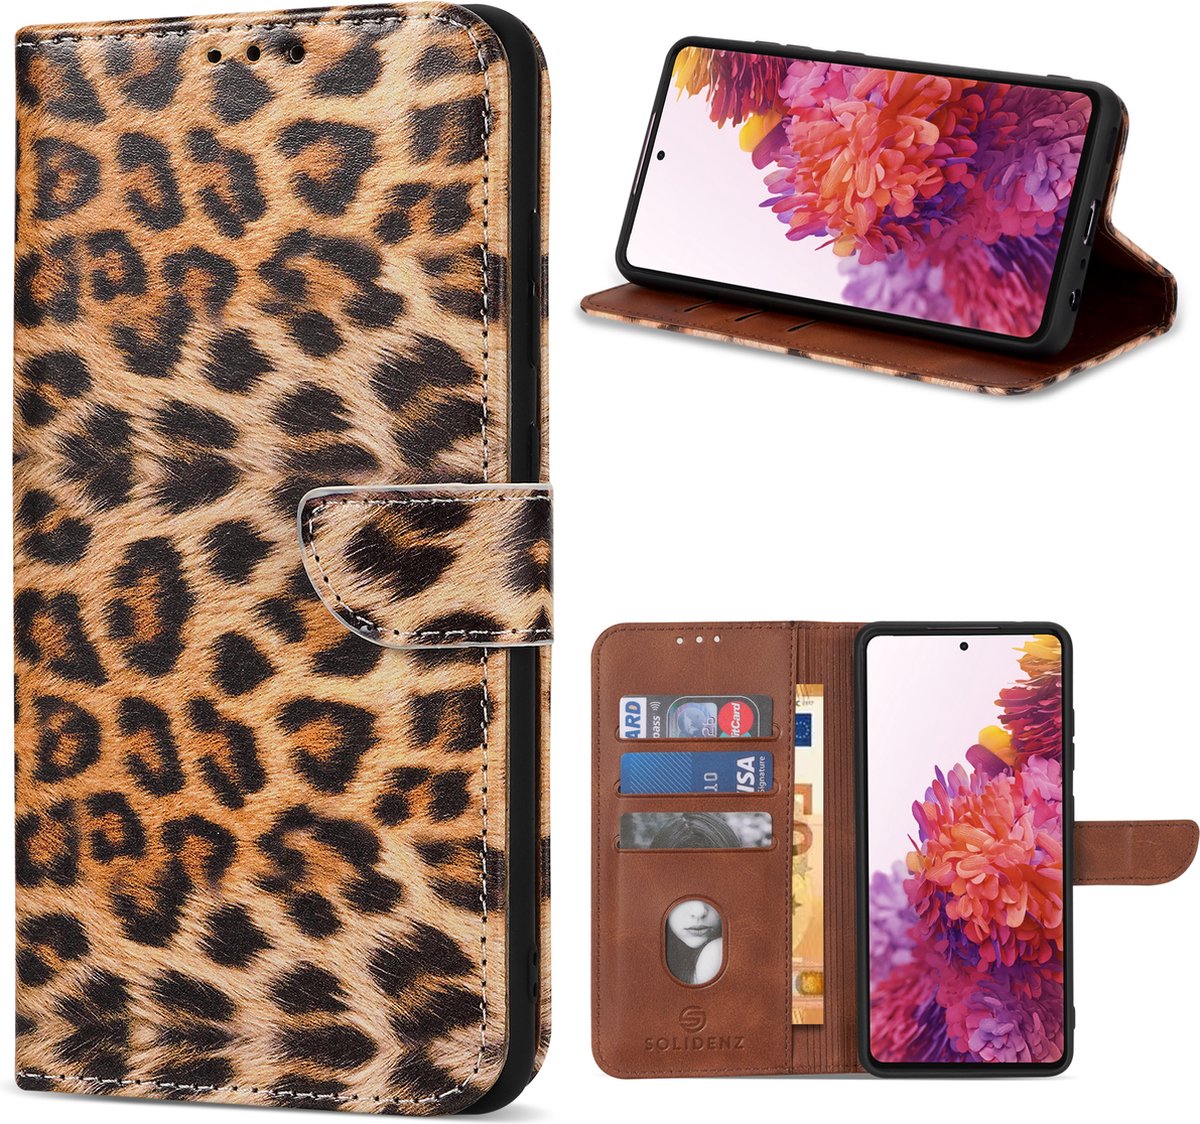 Samsung Galaxy S24 Plus Hoesje - Solidenz Bookcase S24 Plus - Telefoonhoesje S24 Plus - S24 Plus Case Met Pasjeshouder - S24+ - Leopard - Panter - Cover Hoes - Luipaard